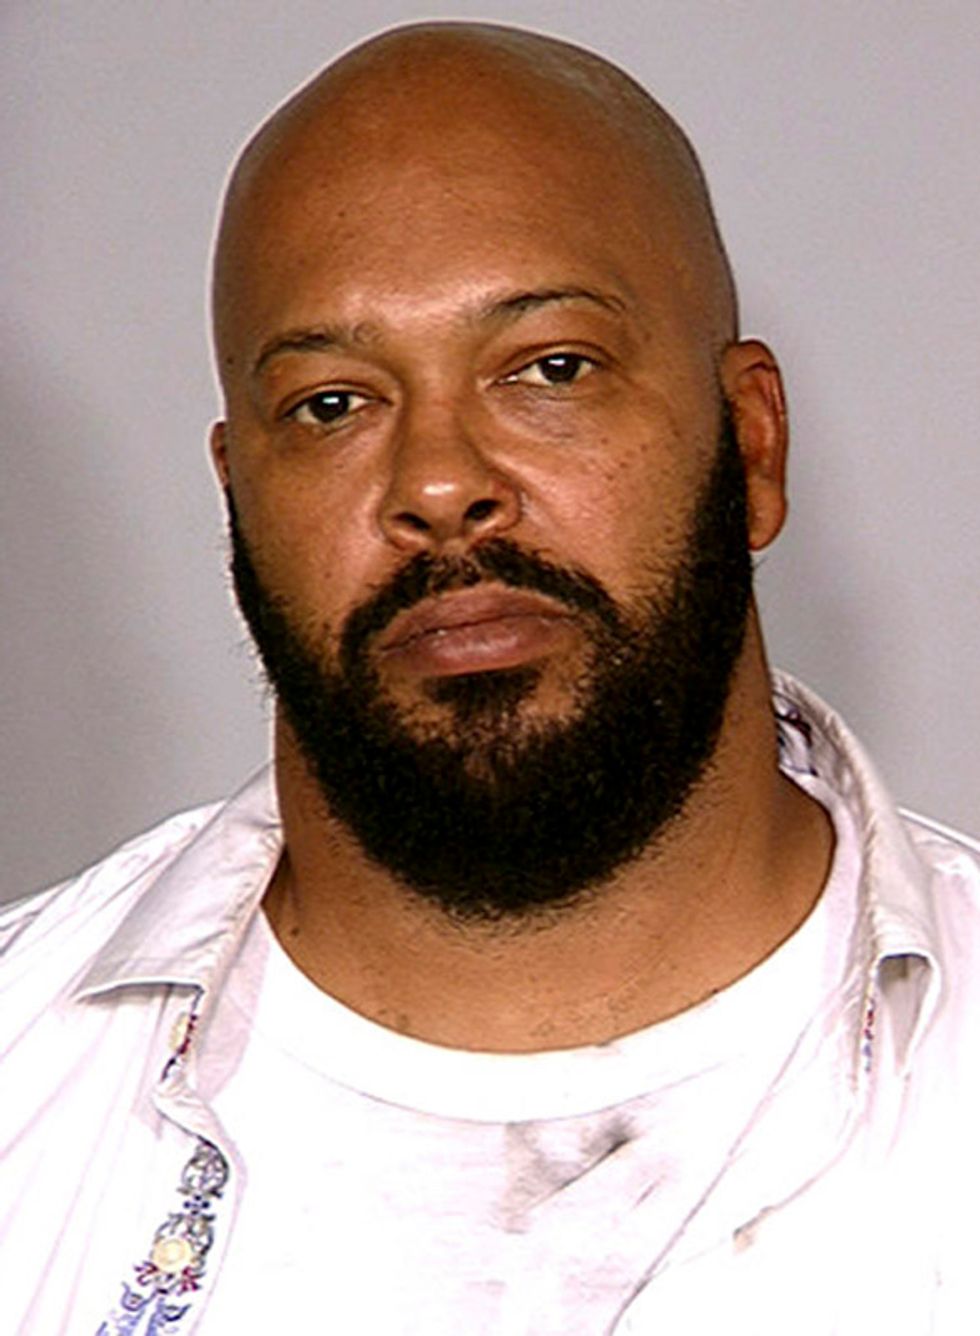 Rap Mogul Suge Knight Charged With Murder, Attempted Murder in Fatal Hit-and-Run Incident